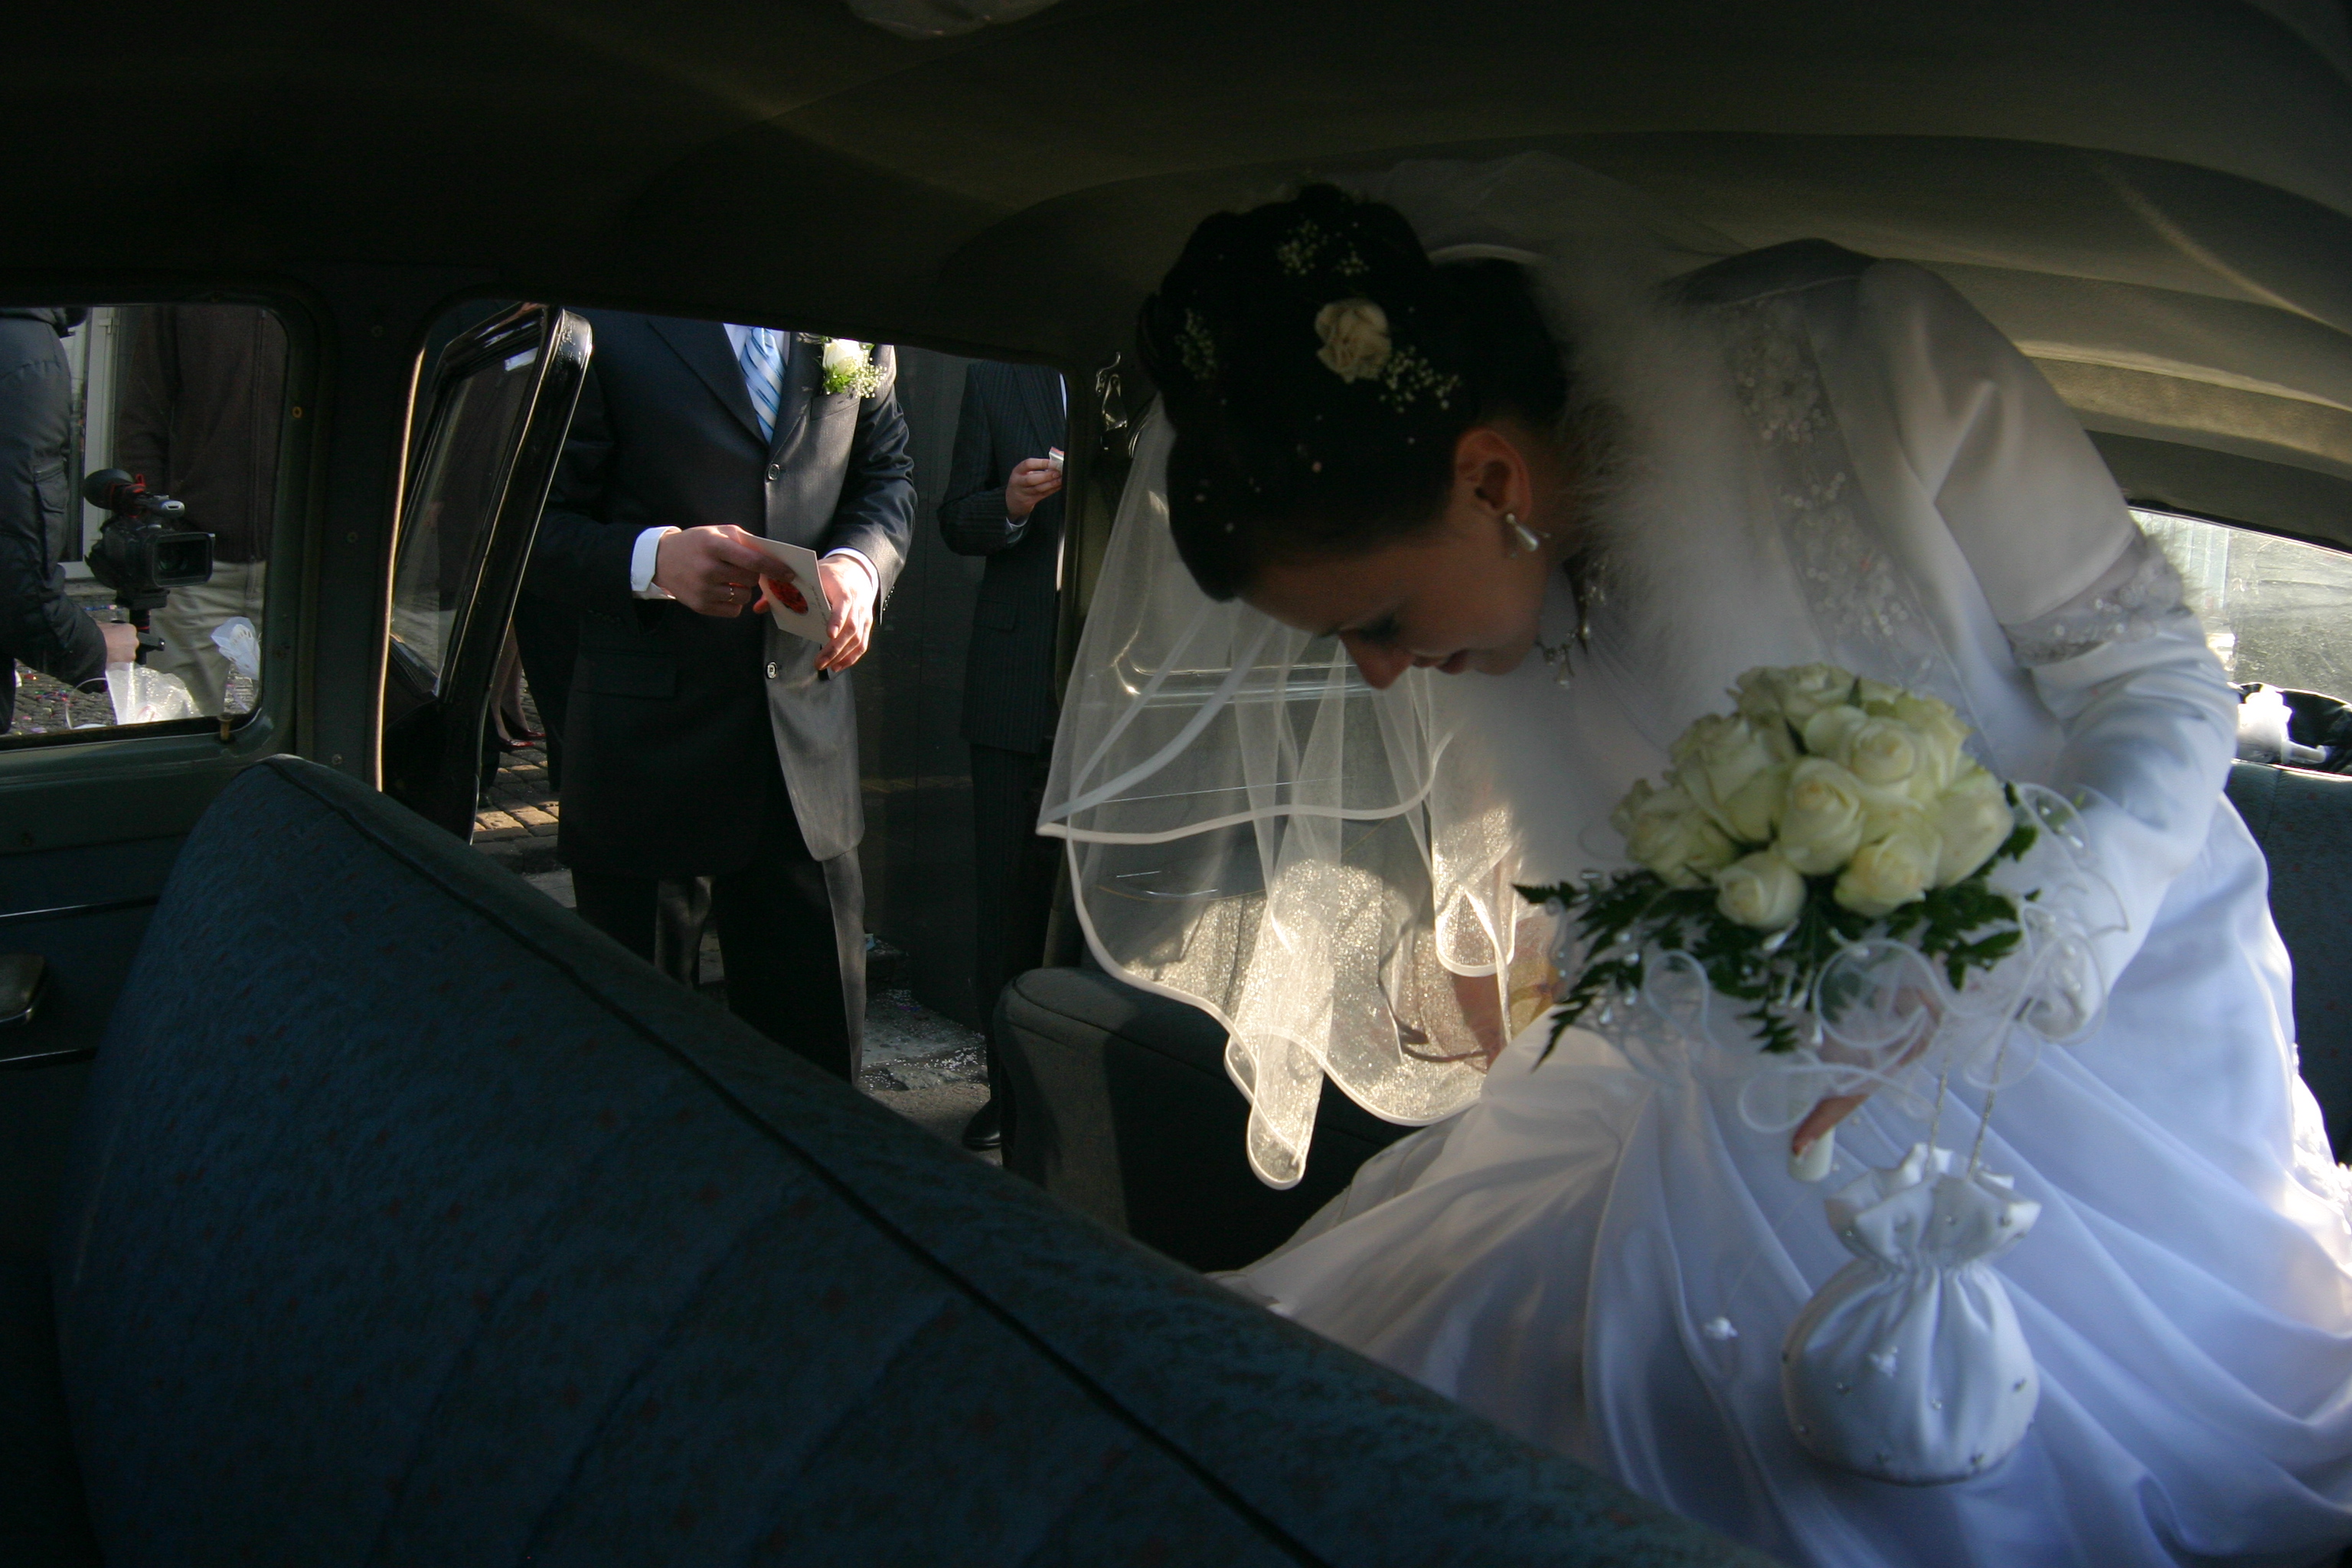 13 Wedding Traditions that Are Still Practiced This Year